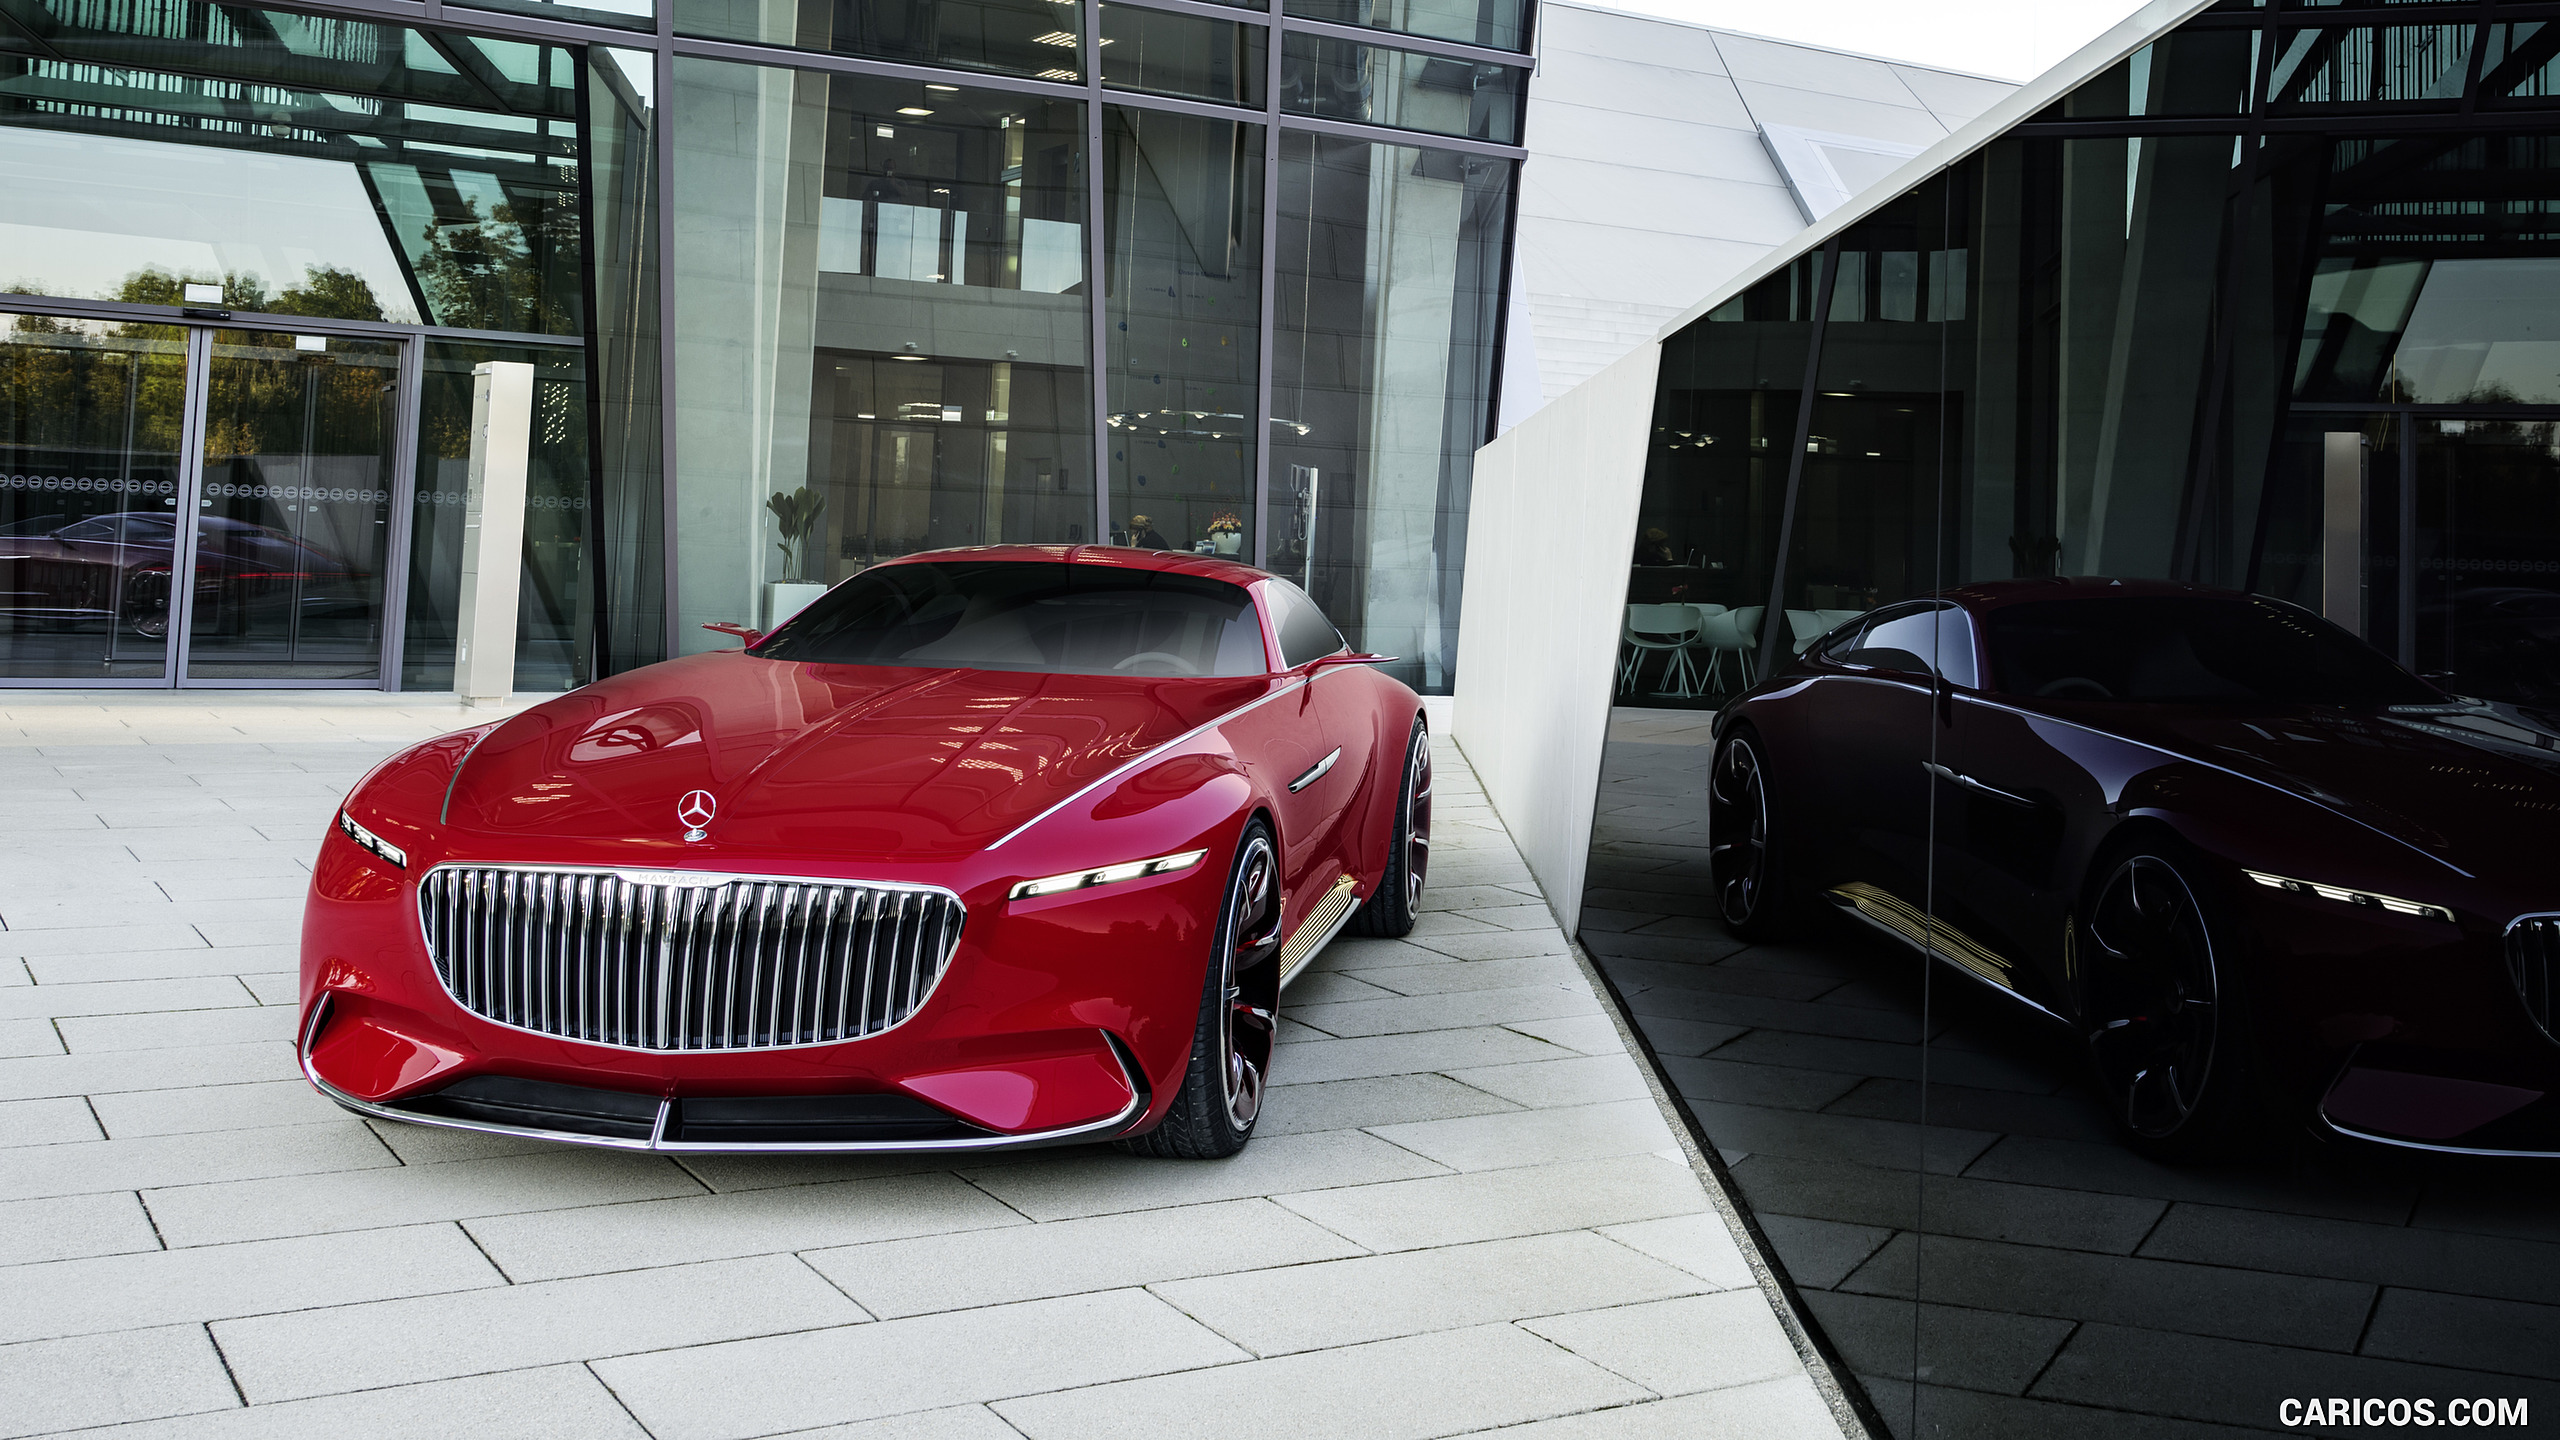 2016 Mercedes-Maybach 6 Concept - Front, #24 of 31